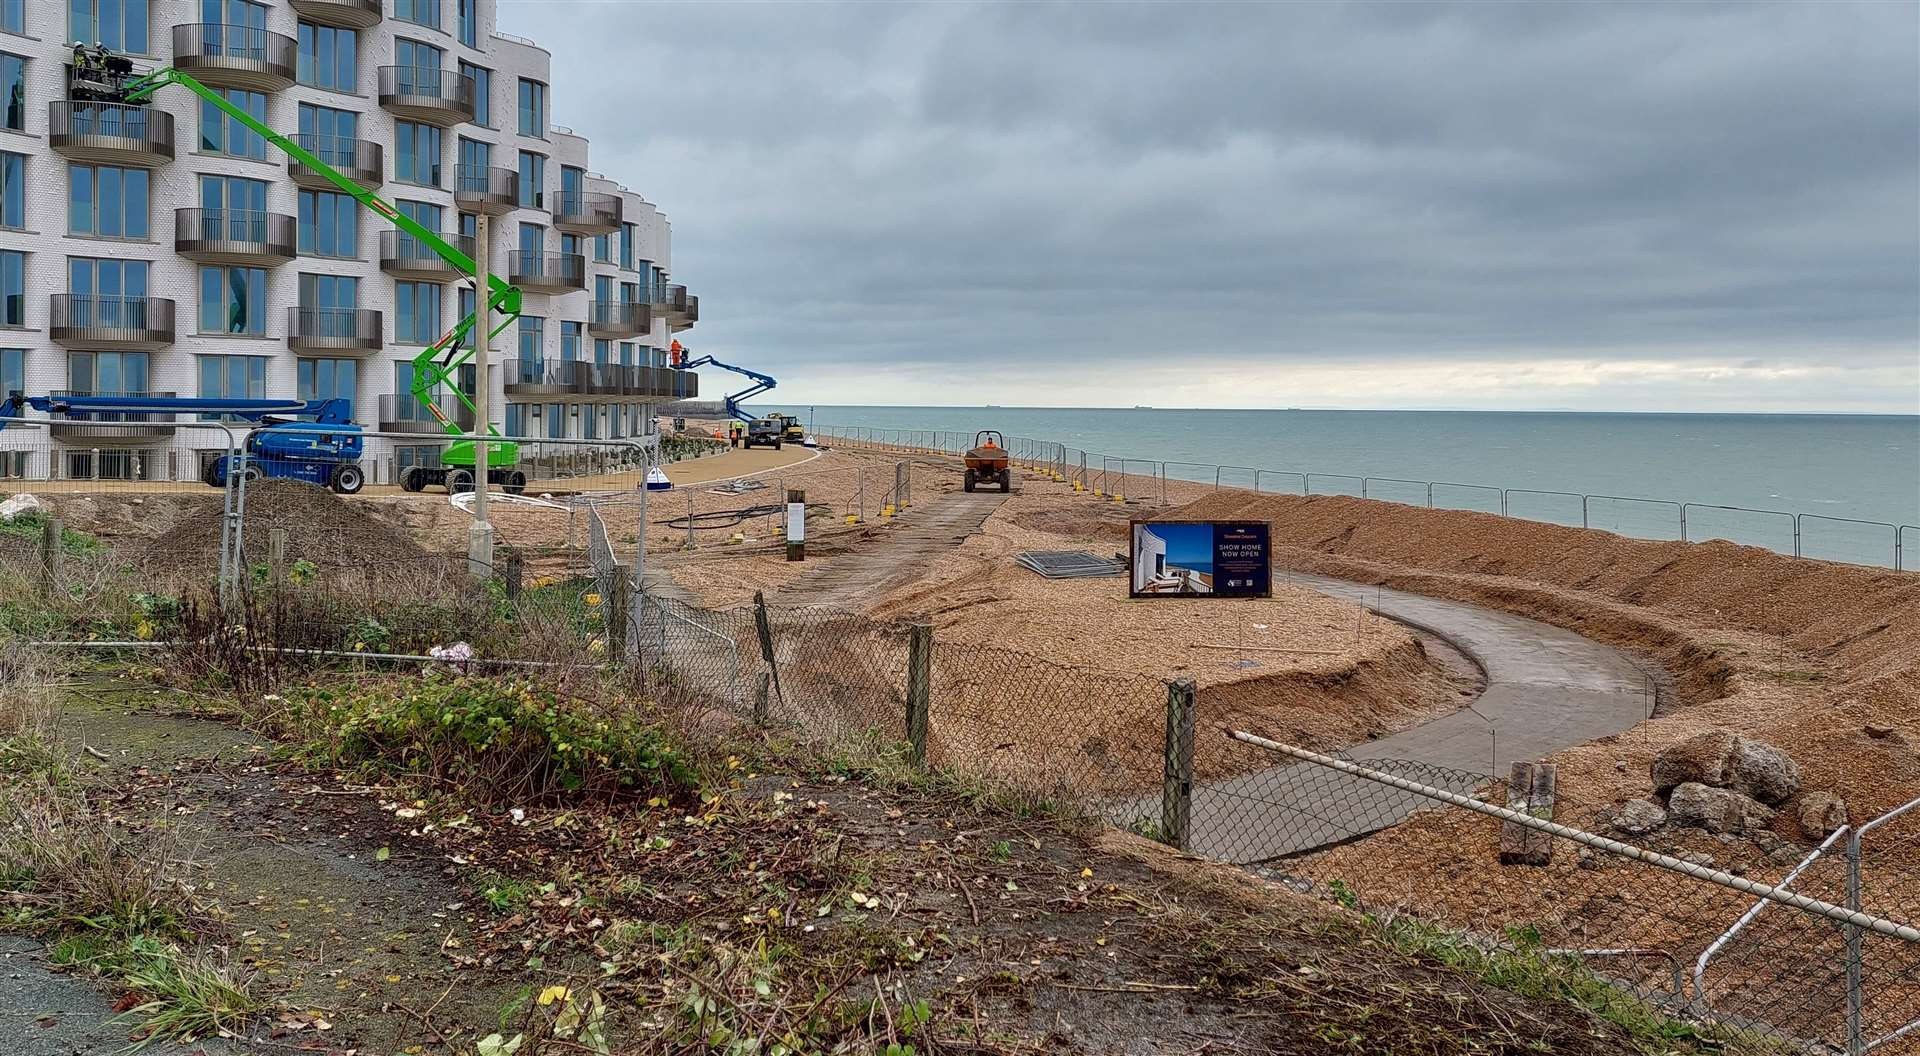 A new section of the boardwalk is being dug out in front of the Shoreline flats on Folkestone seafront